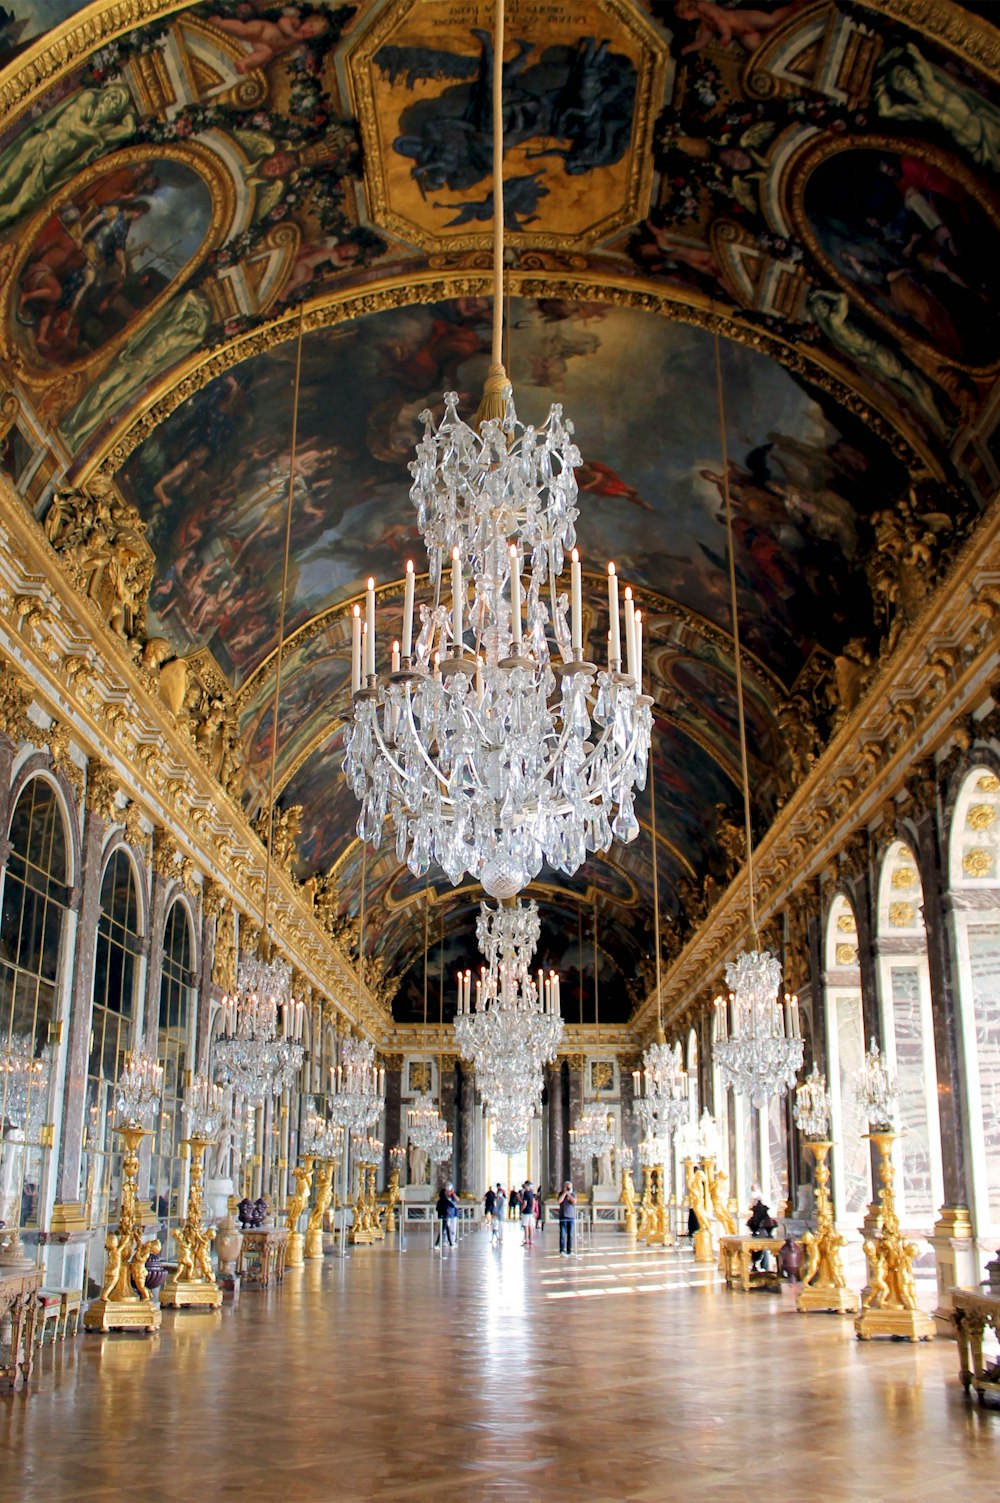 a chandelier hanging from the ceiling of a palace